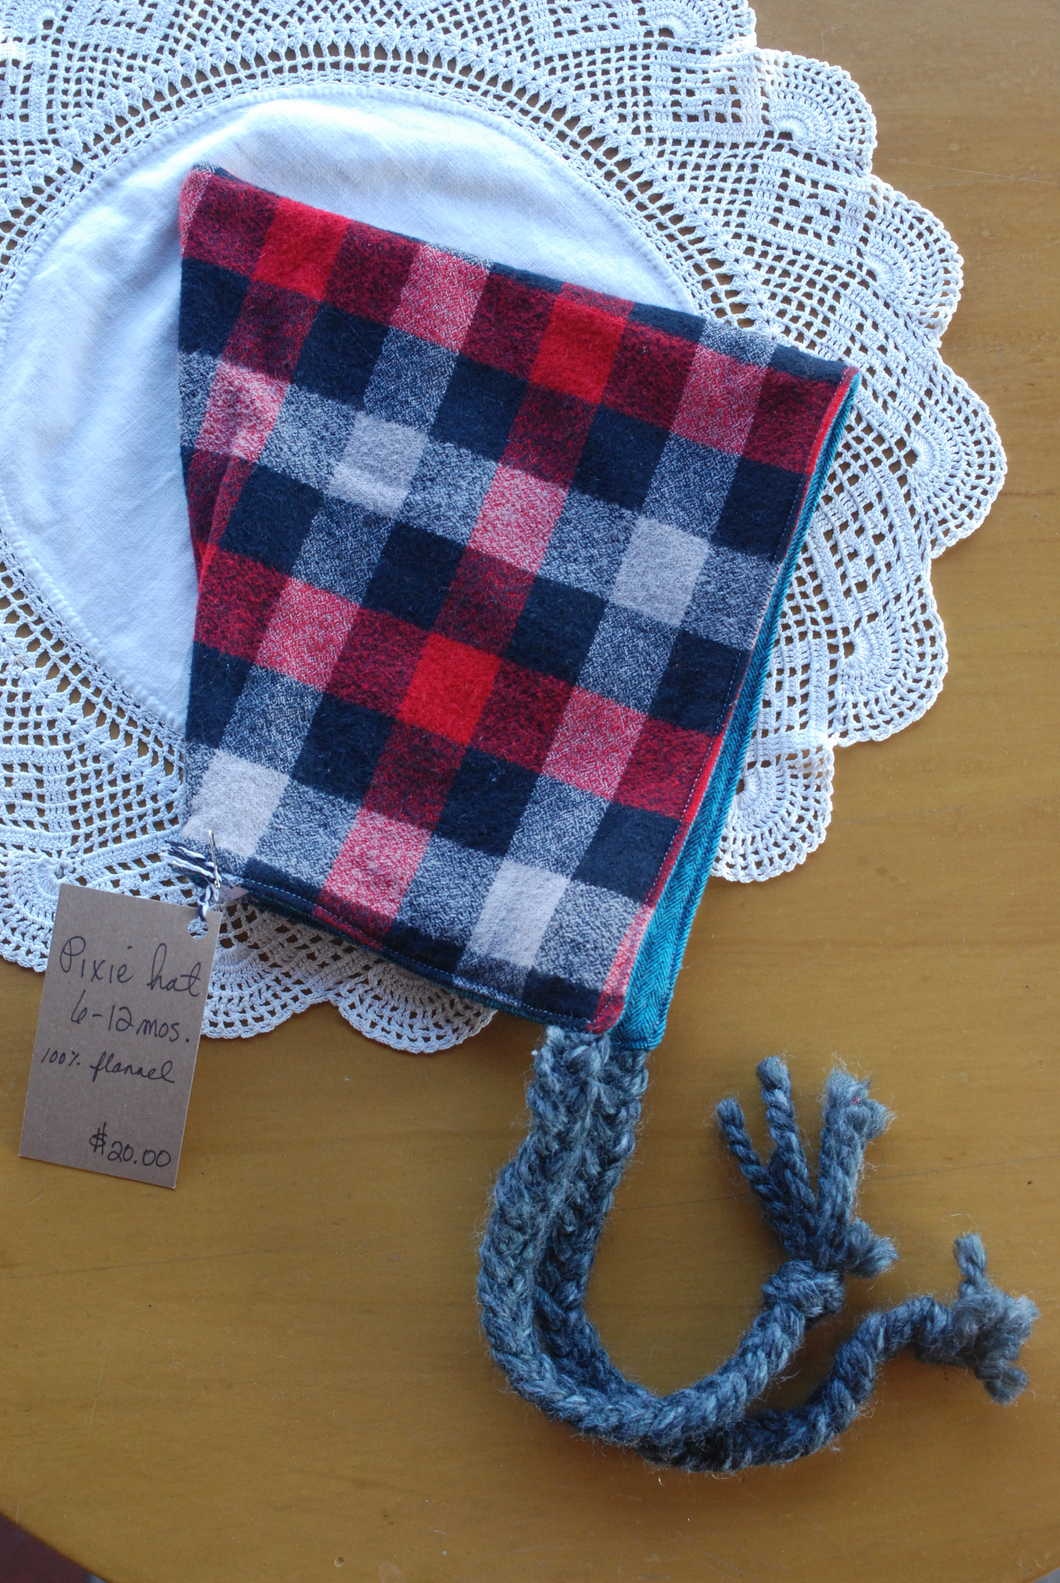 Plaid Flannel/Teal Herringbone Flannel Size 6-12 month size Pixie Hat